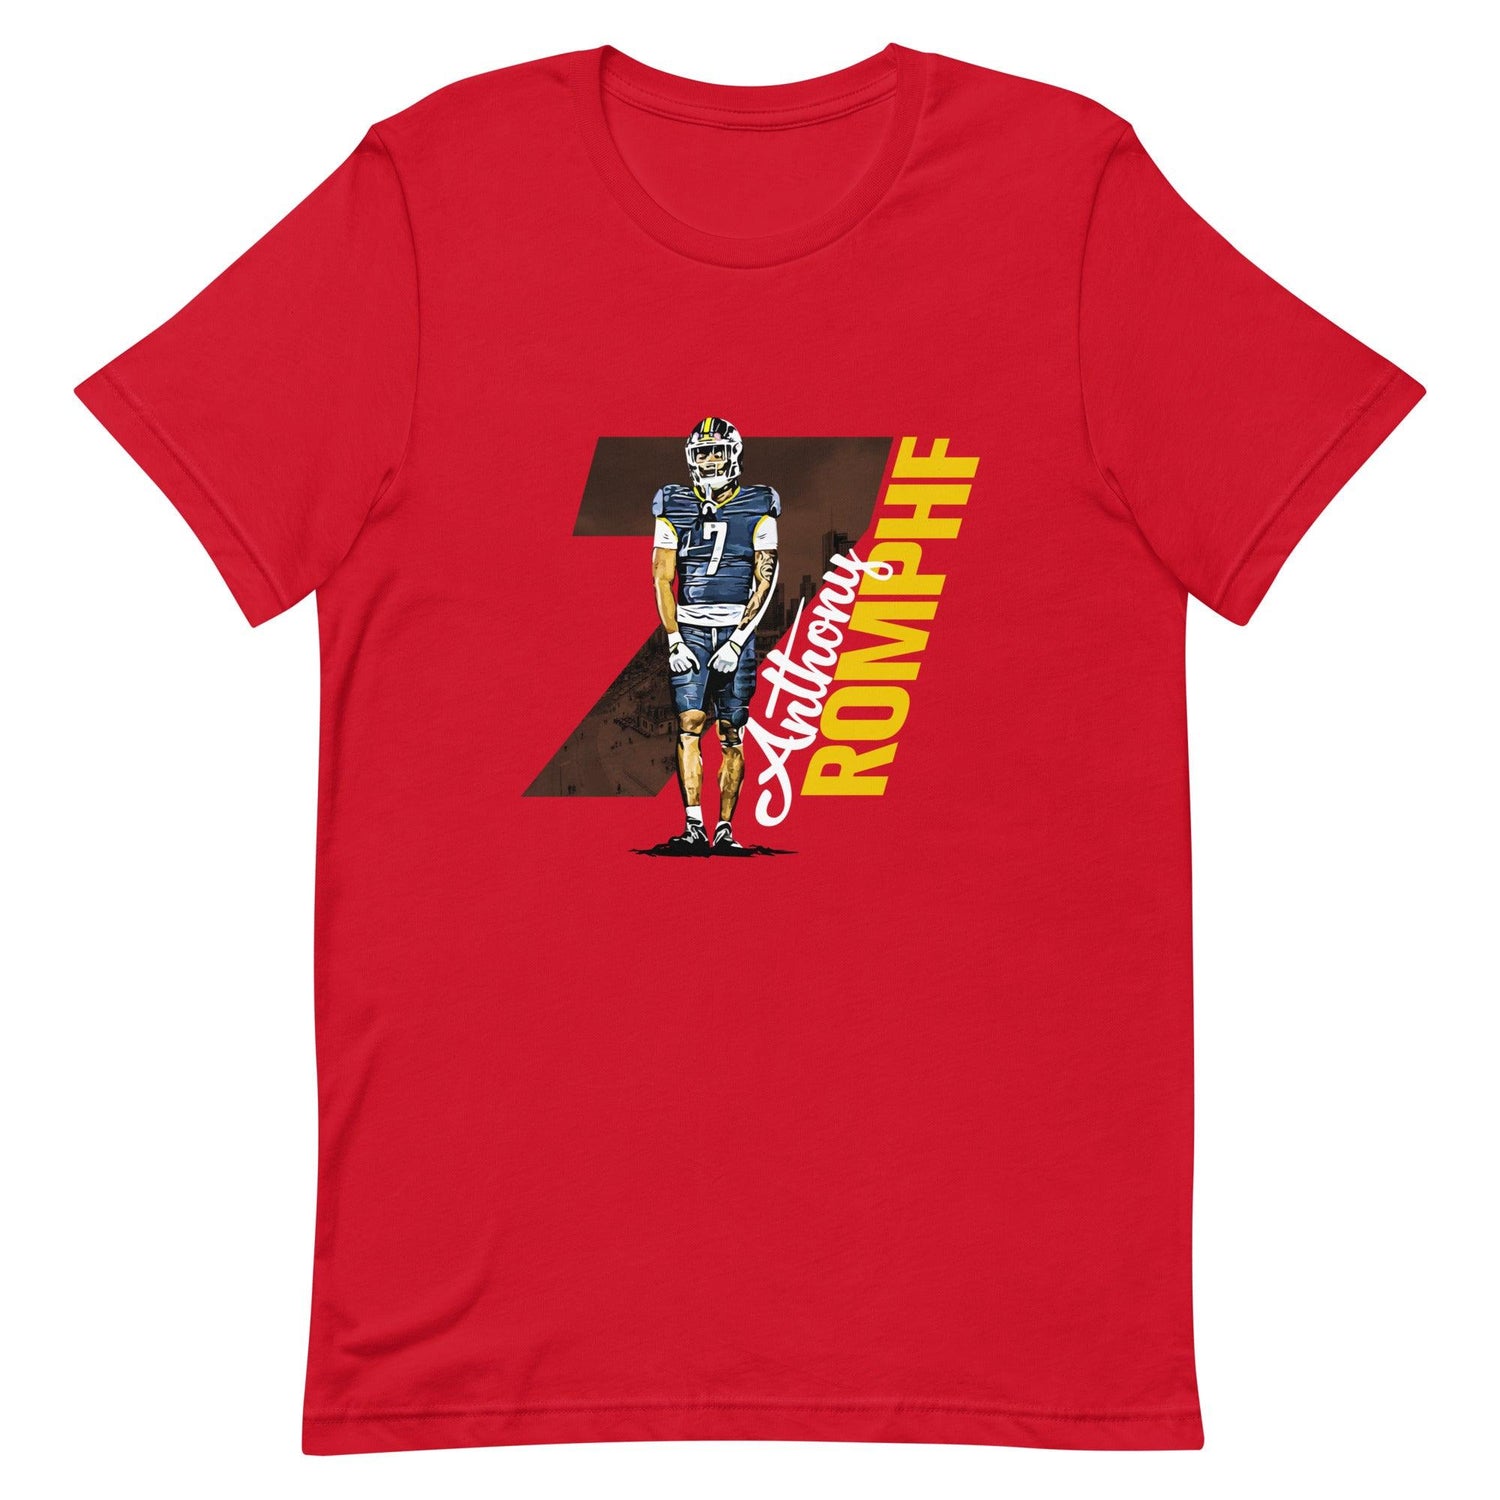 Anthony Romphf "Gameday" t-shirt - Fan Arch